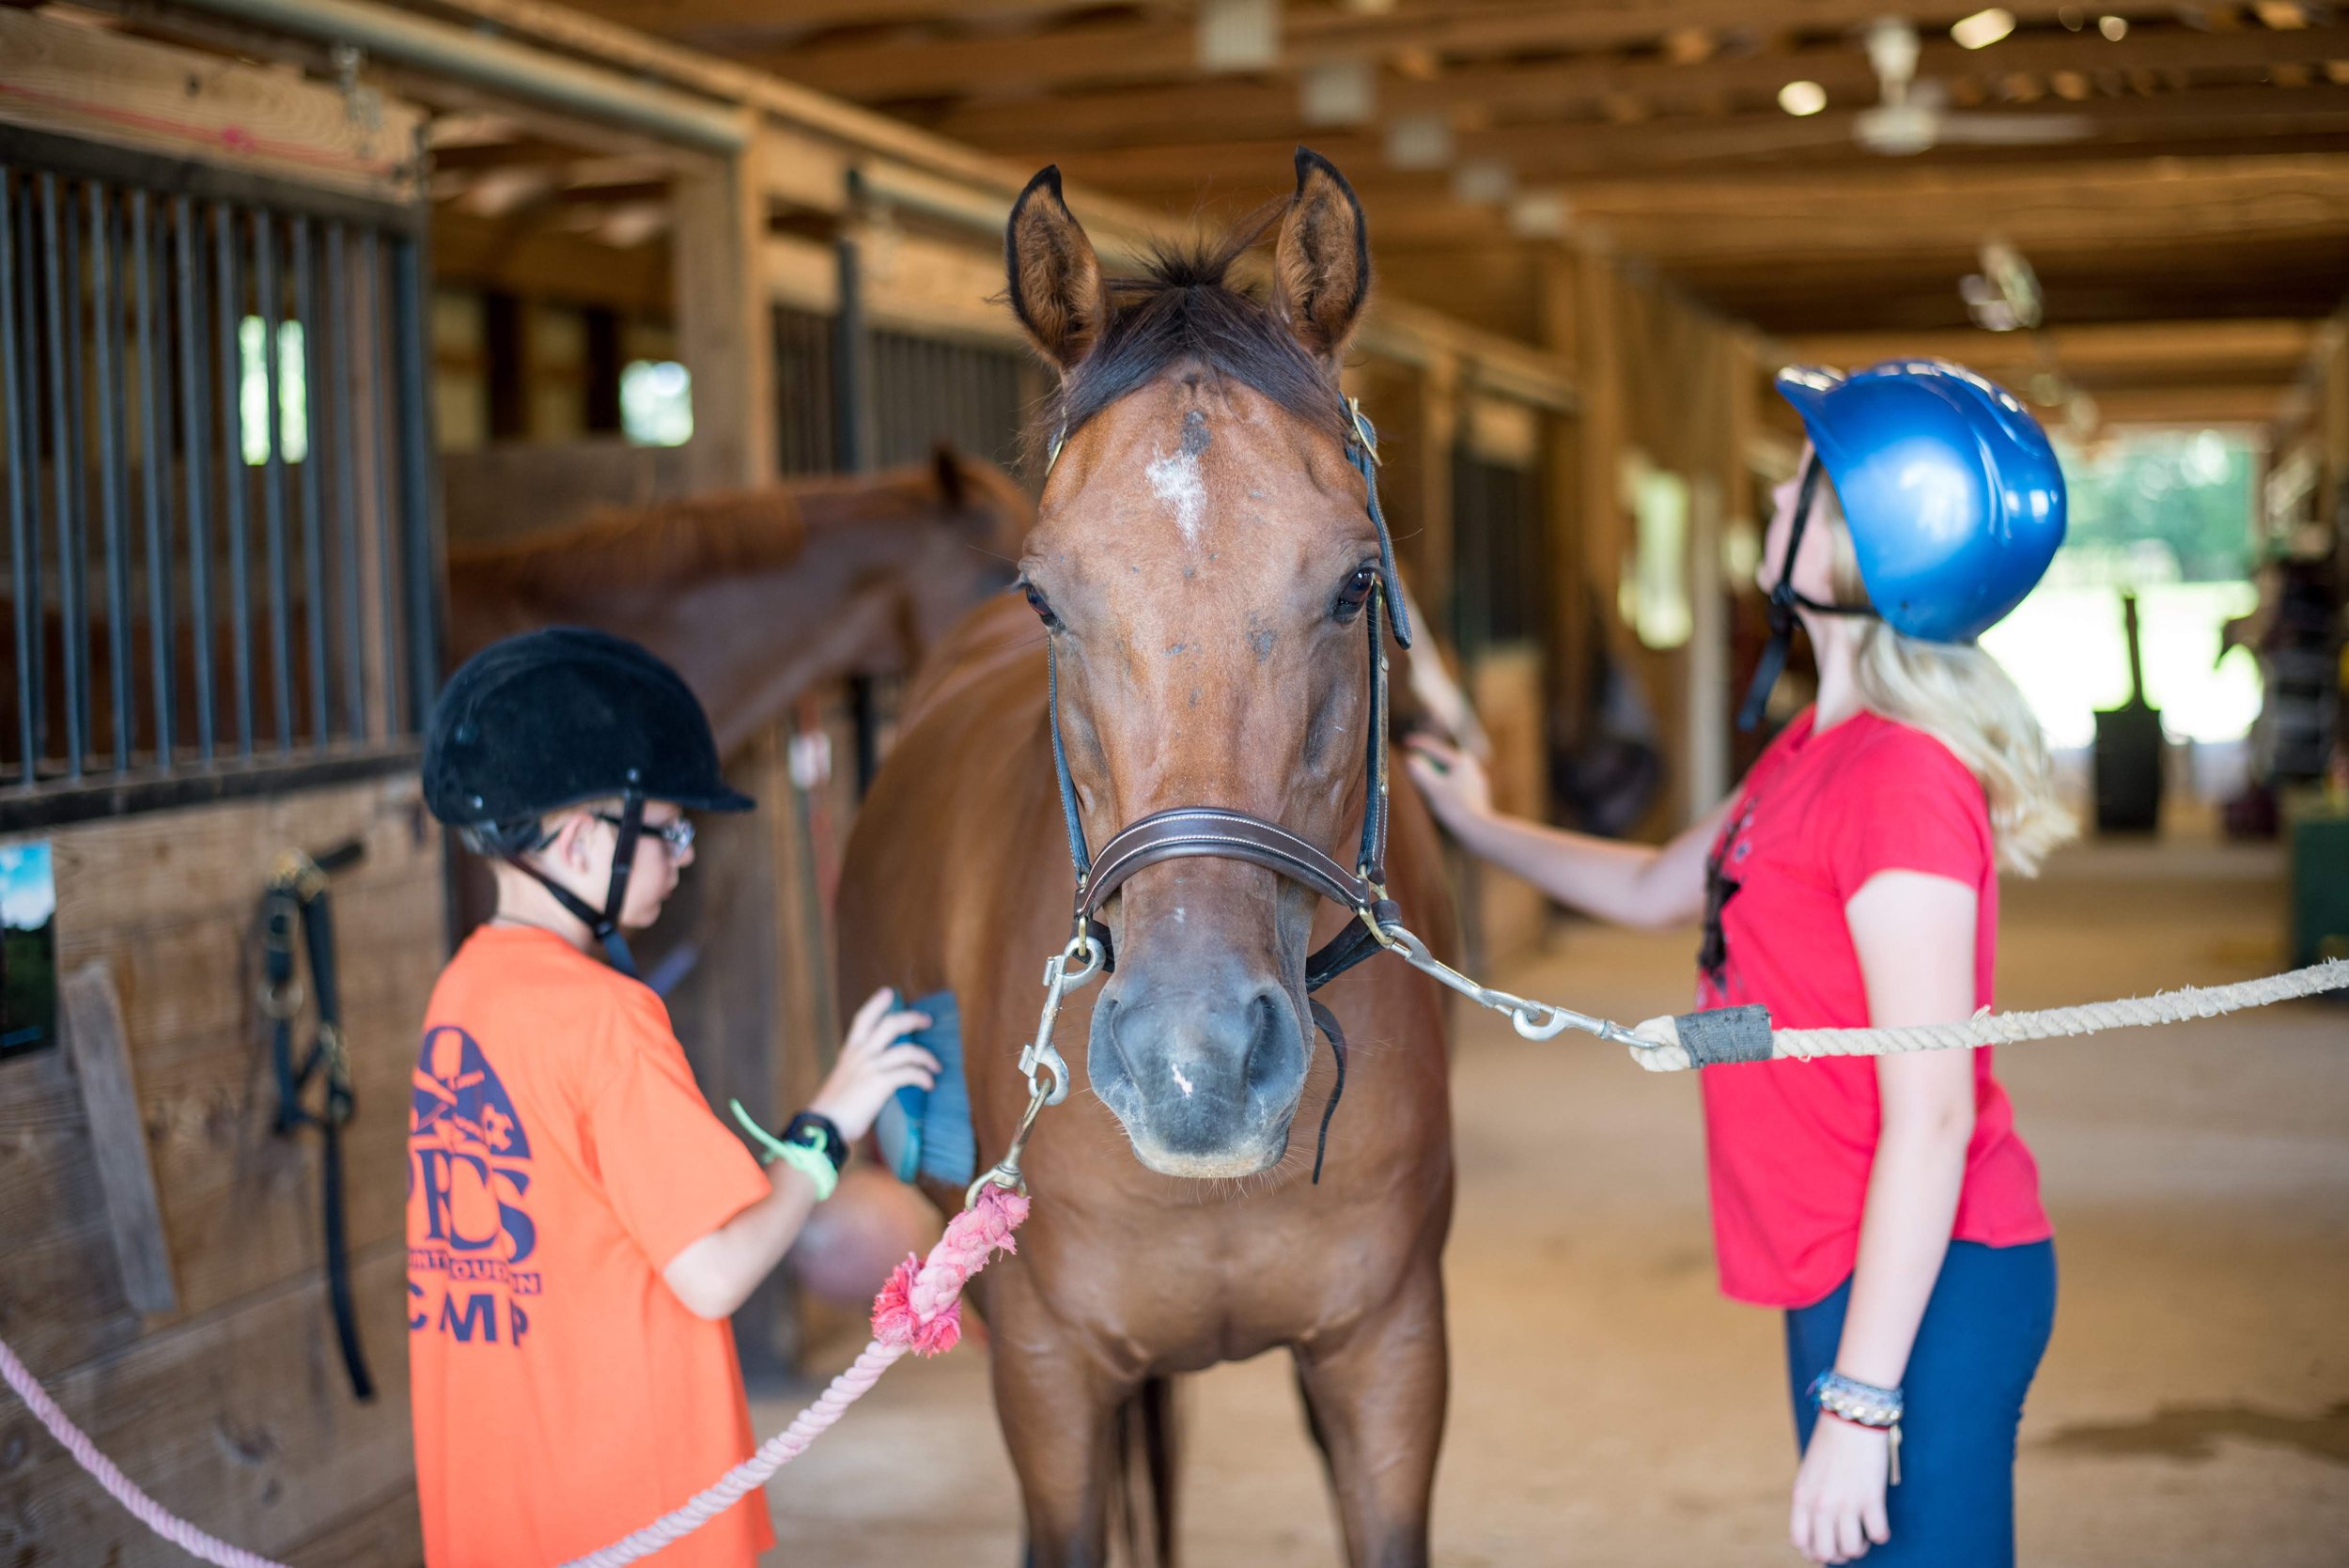 Campers learning new skills through Oakland's equestrian program.